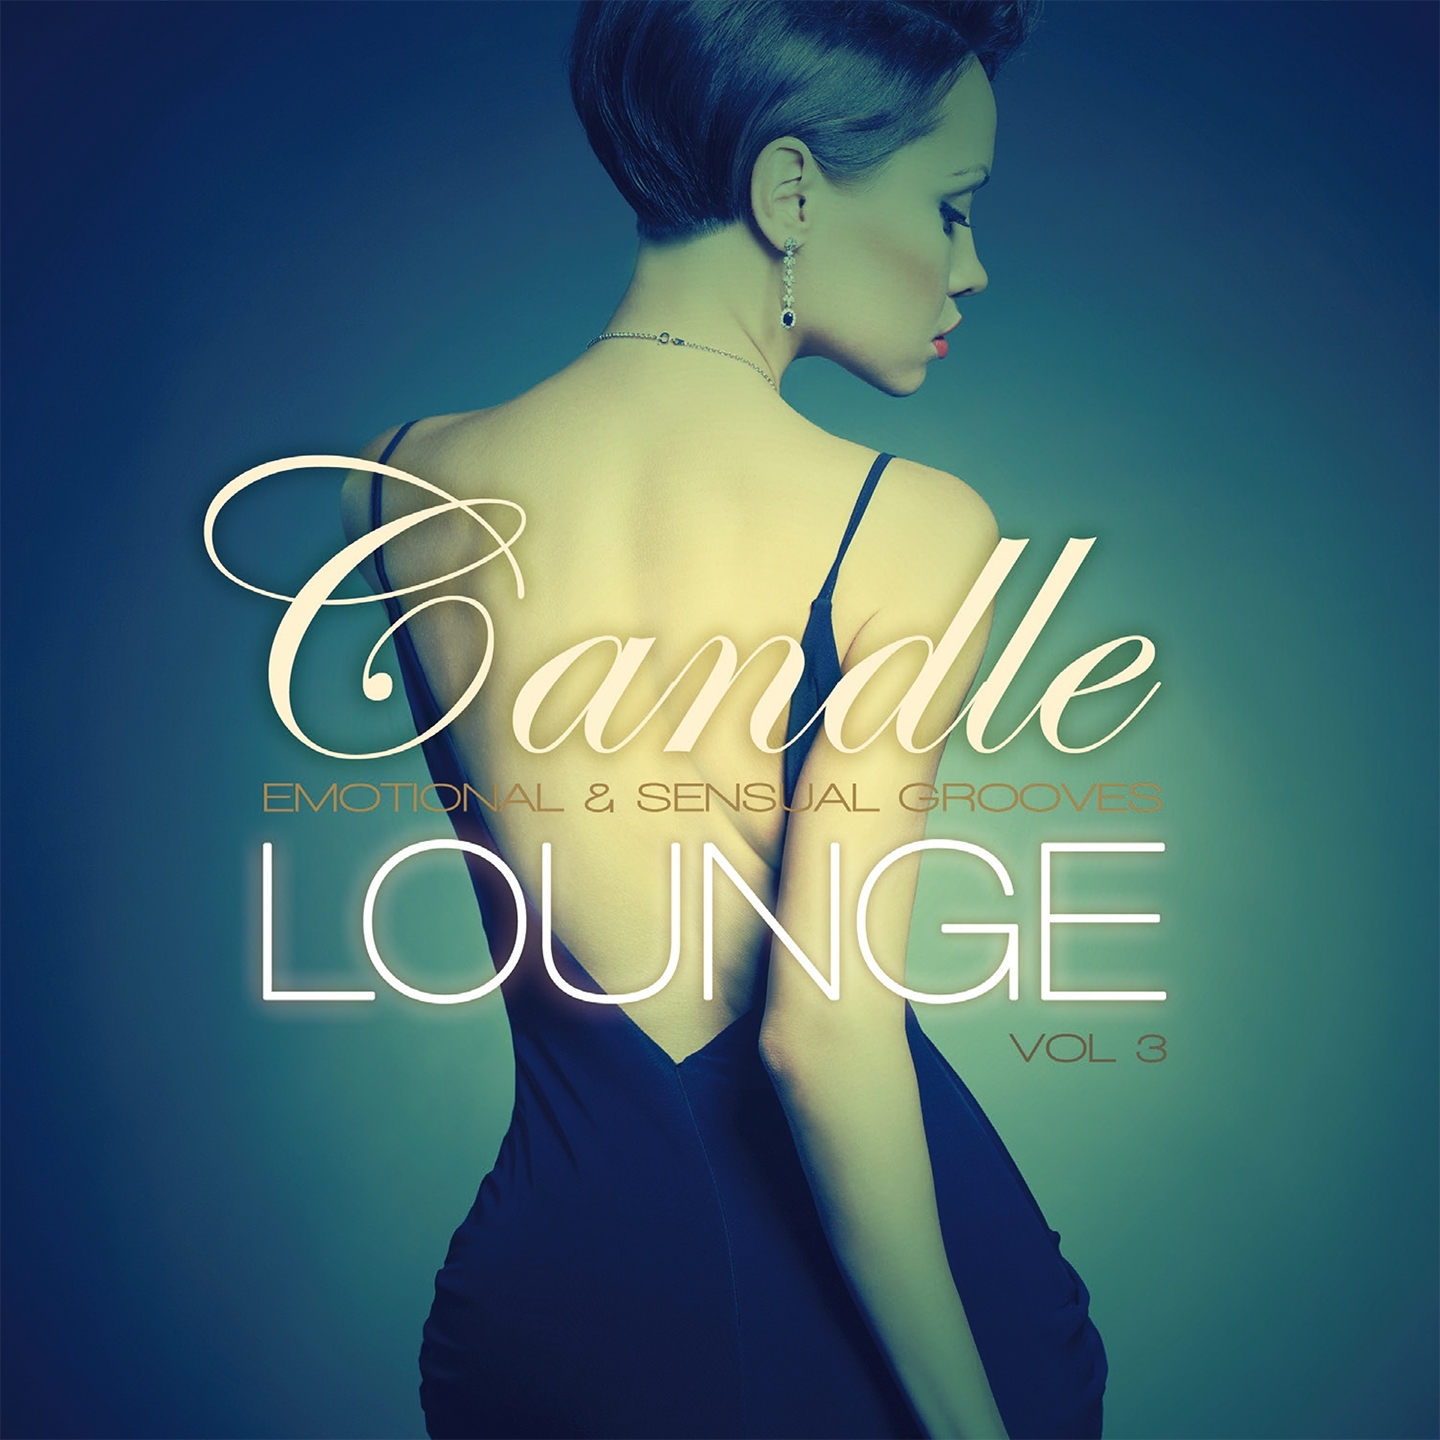 Candle Lounge, Vol. 3 (Kohntinuous Mix 1)